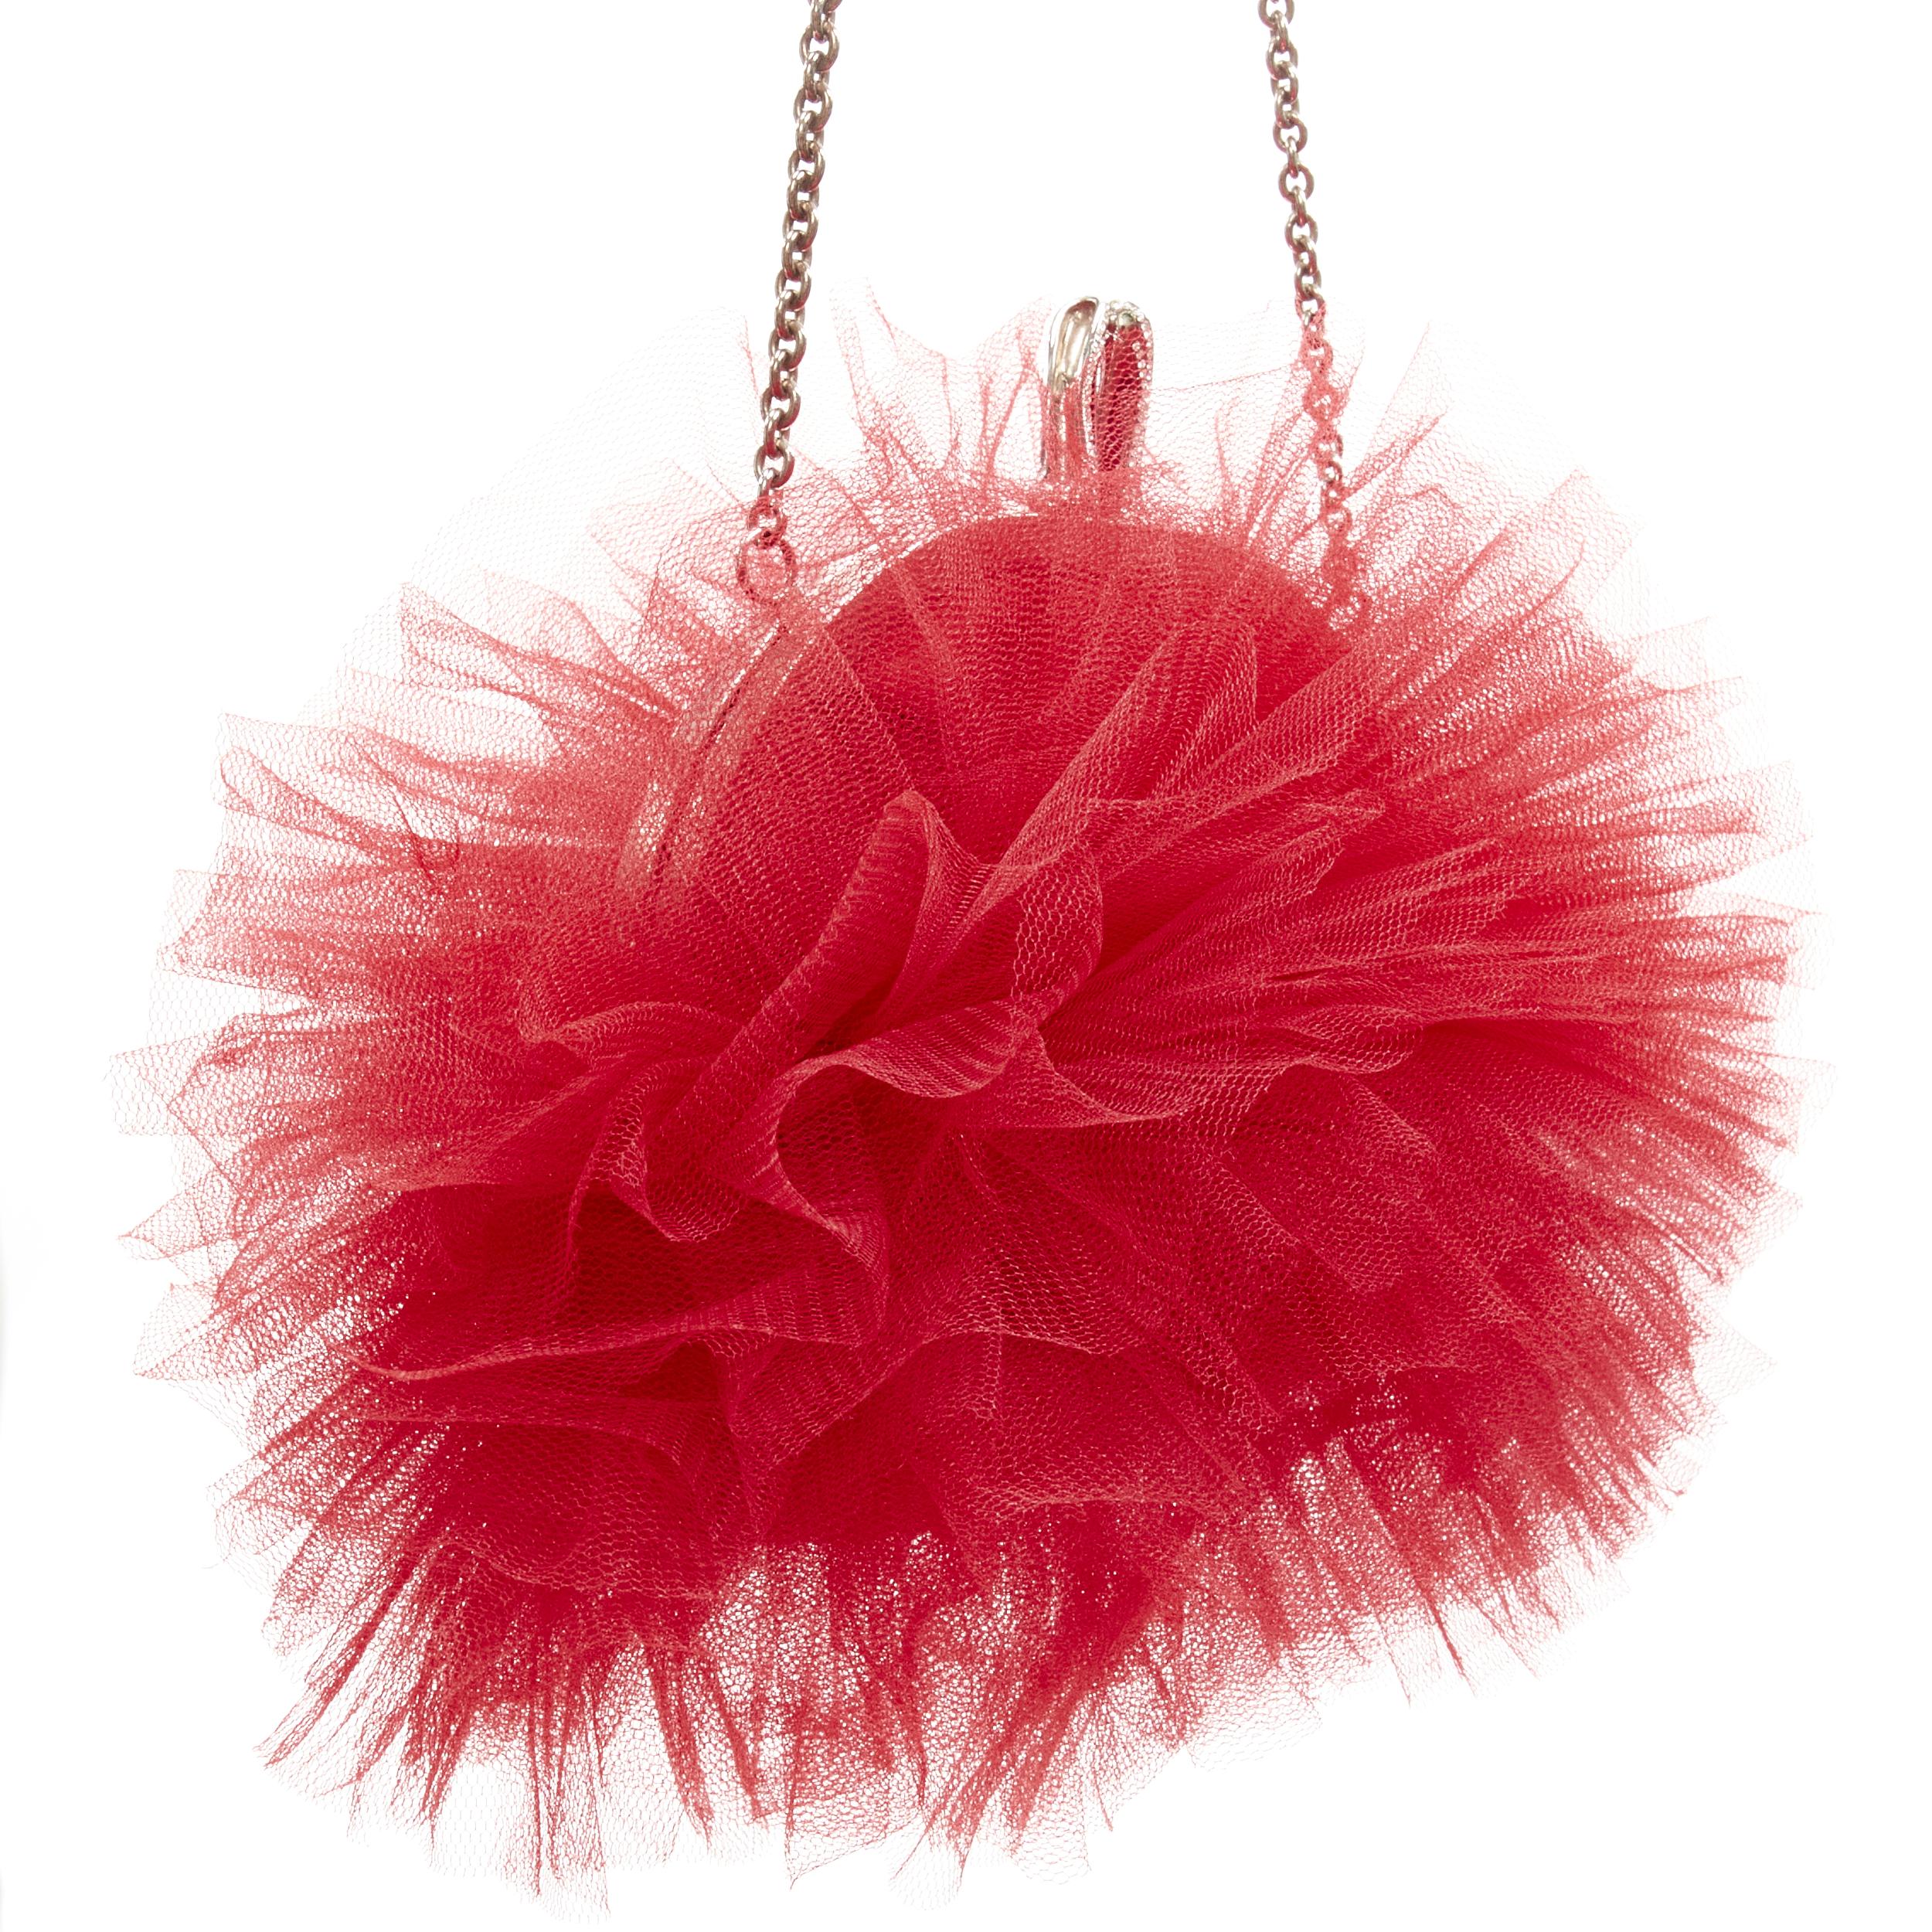 CHRISTIAN LOUBOUTIN Tutulle red tulle strass crystal heel clasp clutch bag For Sale 4